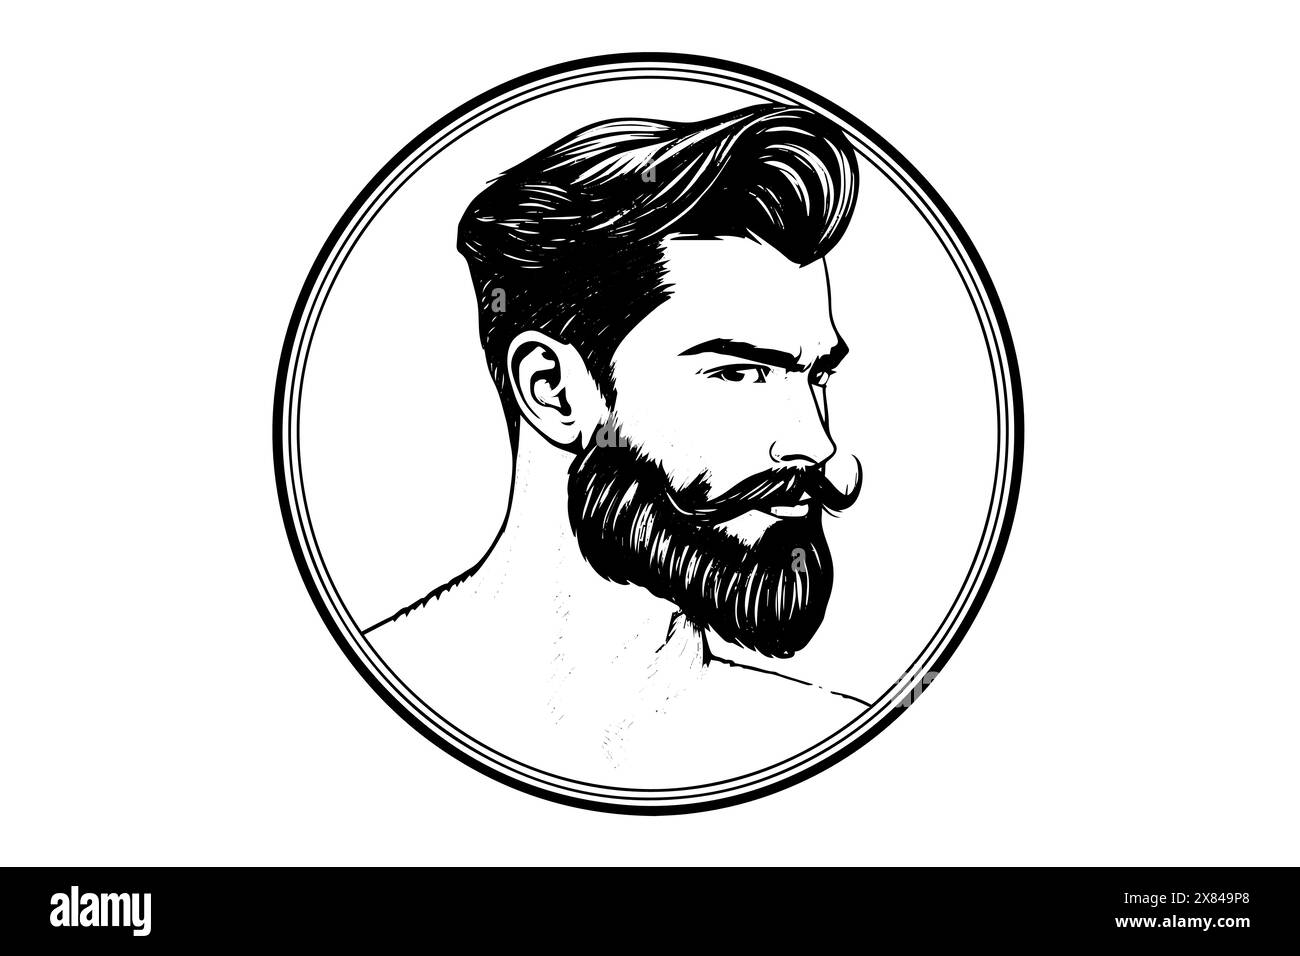 Hand drawn portrait of bearded man in profile. Hipster ink sketch. Logotype vector illustration. Stock Vector